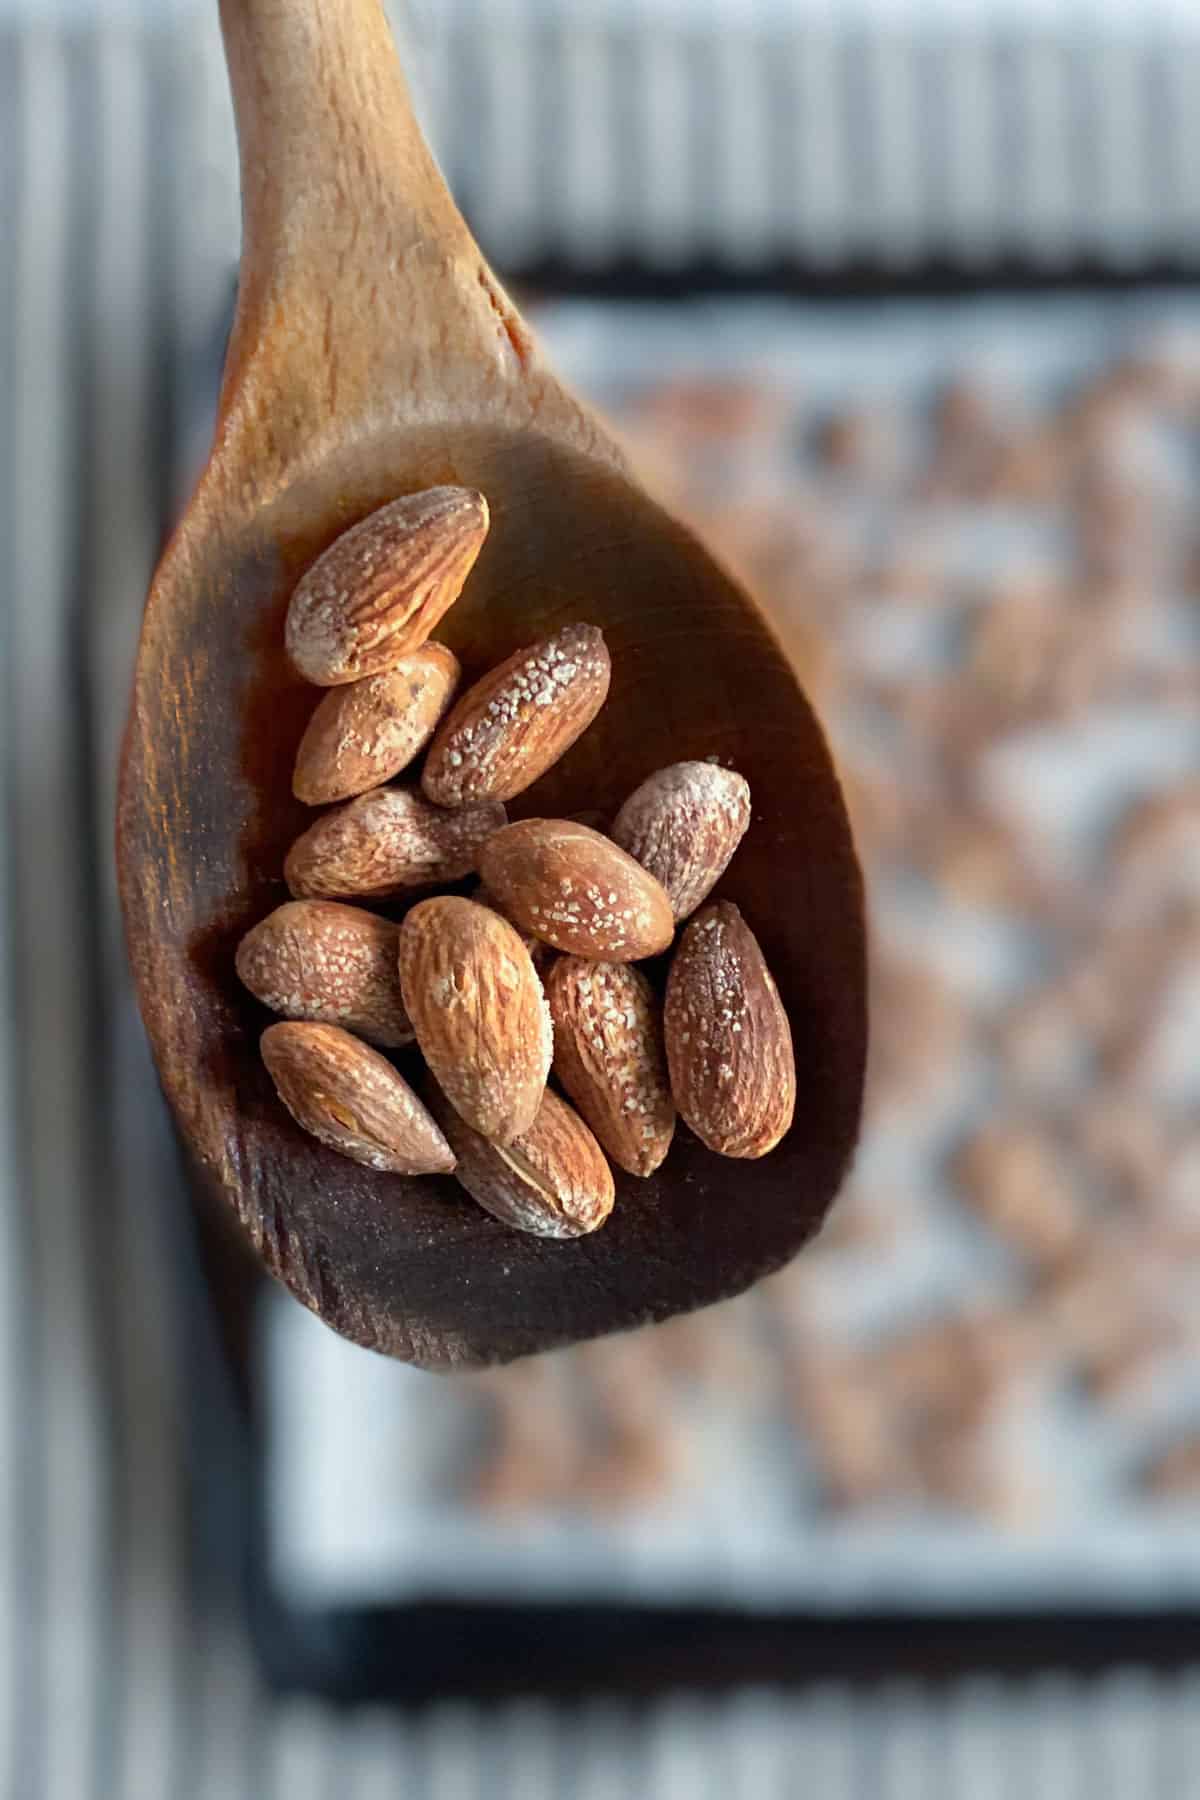 A wooden spoon with salted almonds on it